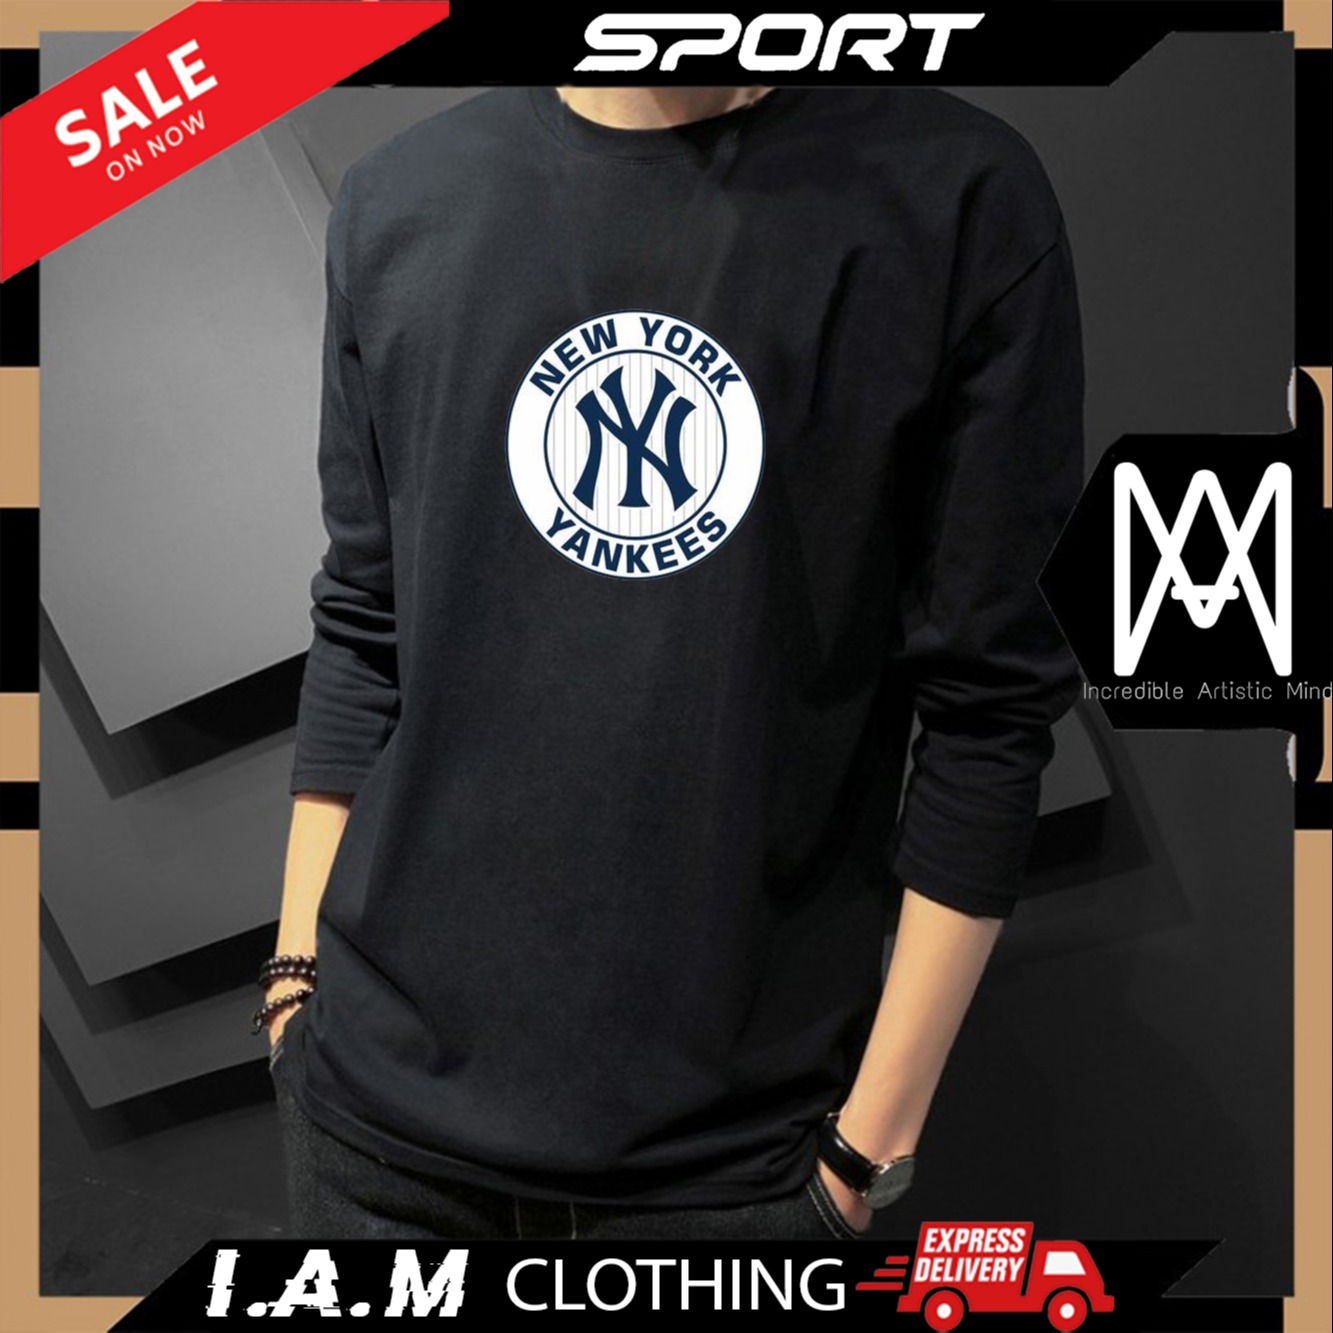 IAM Clothing} Longsleeves Round Neck Classic NEW YORK YANKEES for Men and  Women Good quality Thick Makapal Cotton - Long sleeve shirt outfit Unisex